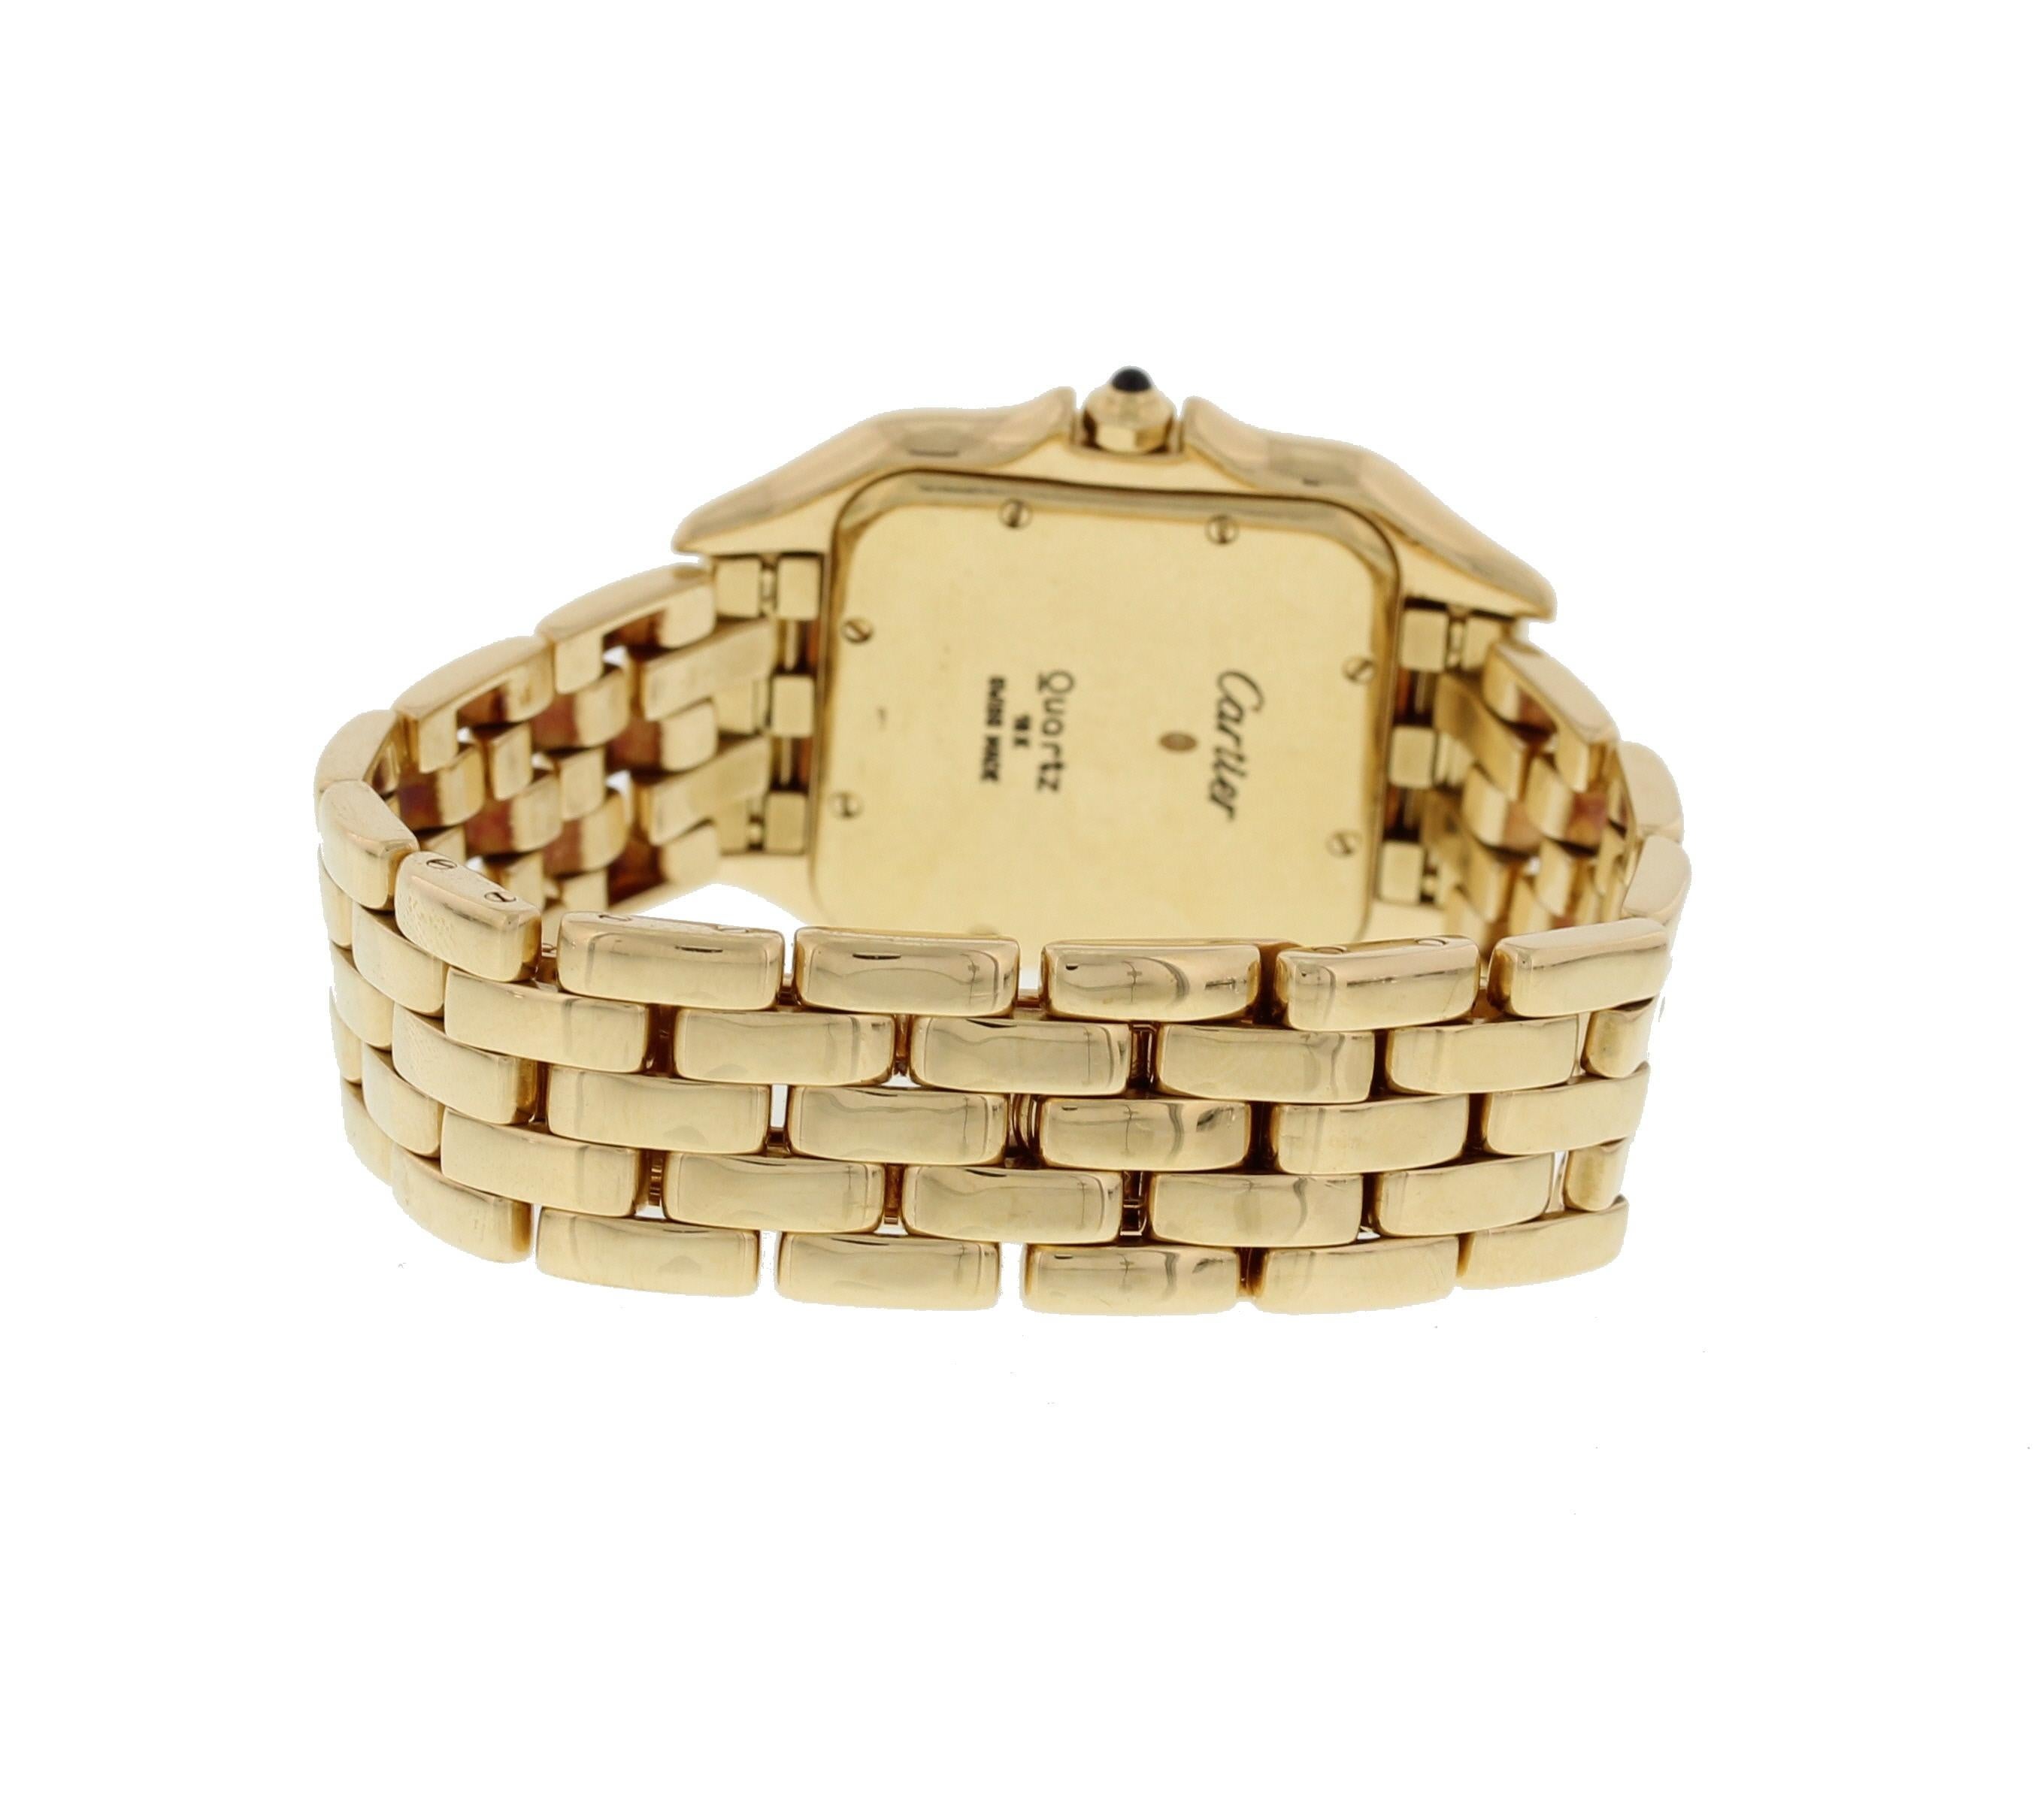 Cartier Panthere 18 Karat Yellow Gold Large 887968 Watch In Excellent Condition For Sale In New York, NY